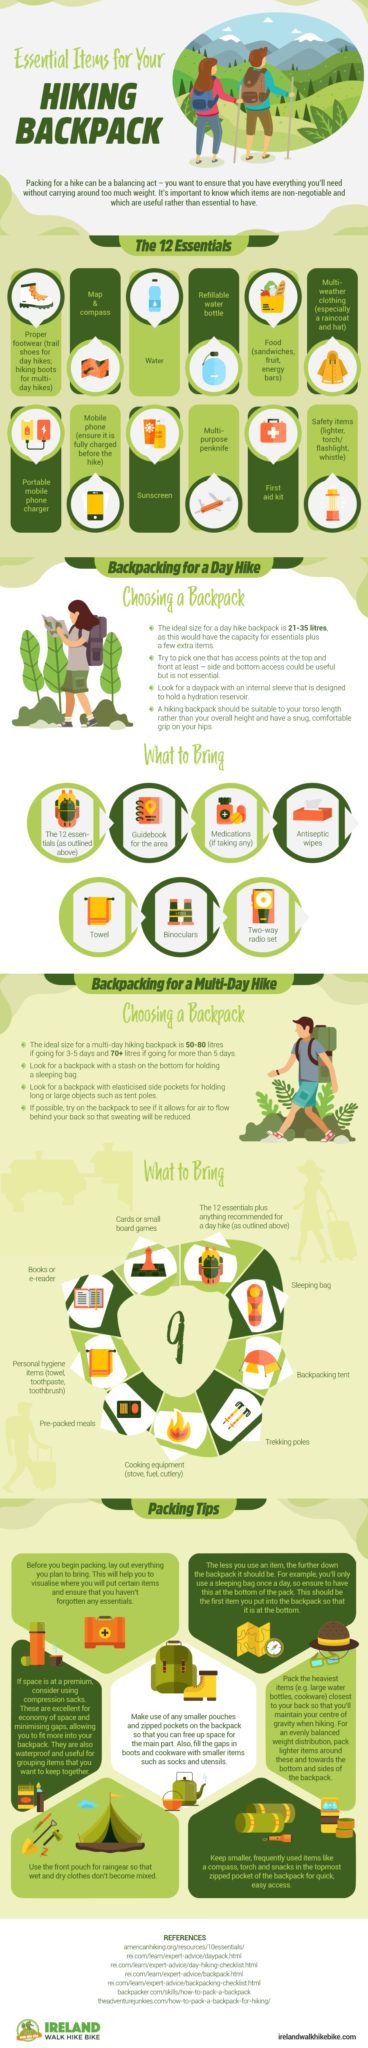 Essential Items for Your Hiking Backpack [Infographic] - Wellington World Travels Backpacking Tips, What To Pack For Hiking, Backpacking Sleeping Bag, Travel Infographic, Hiking And Camping, Hiking Photography, Hiking Essentials, Trekking Shoes, Travel Checklist